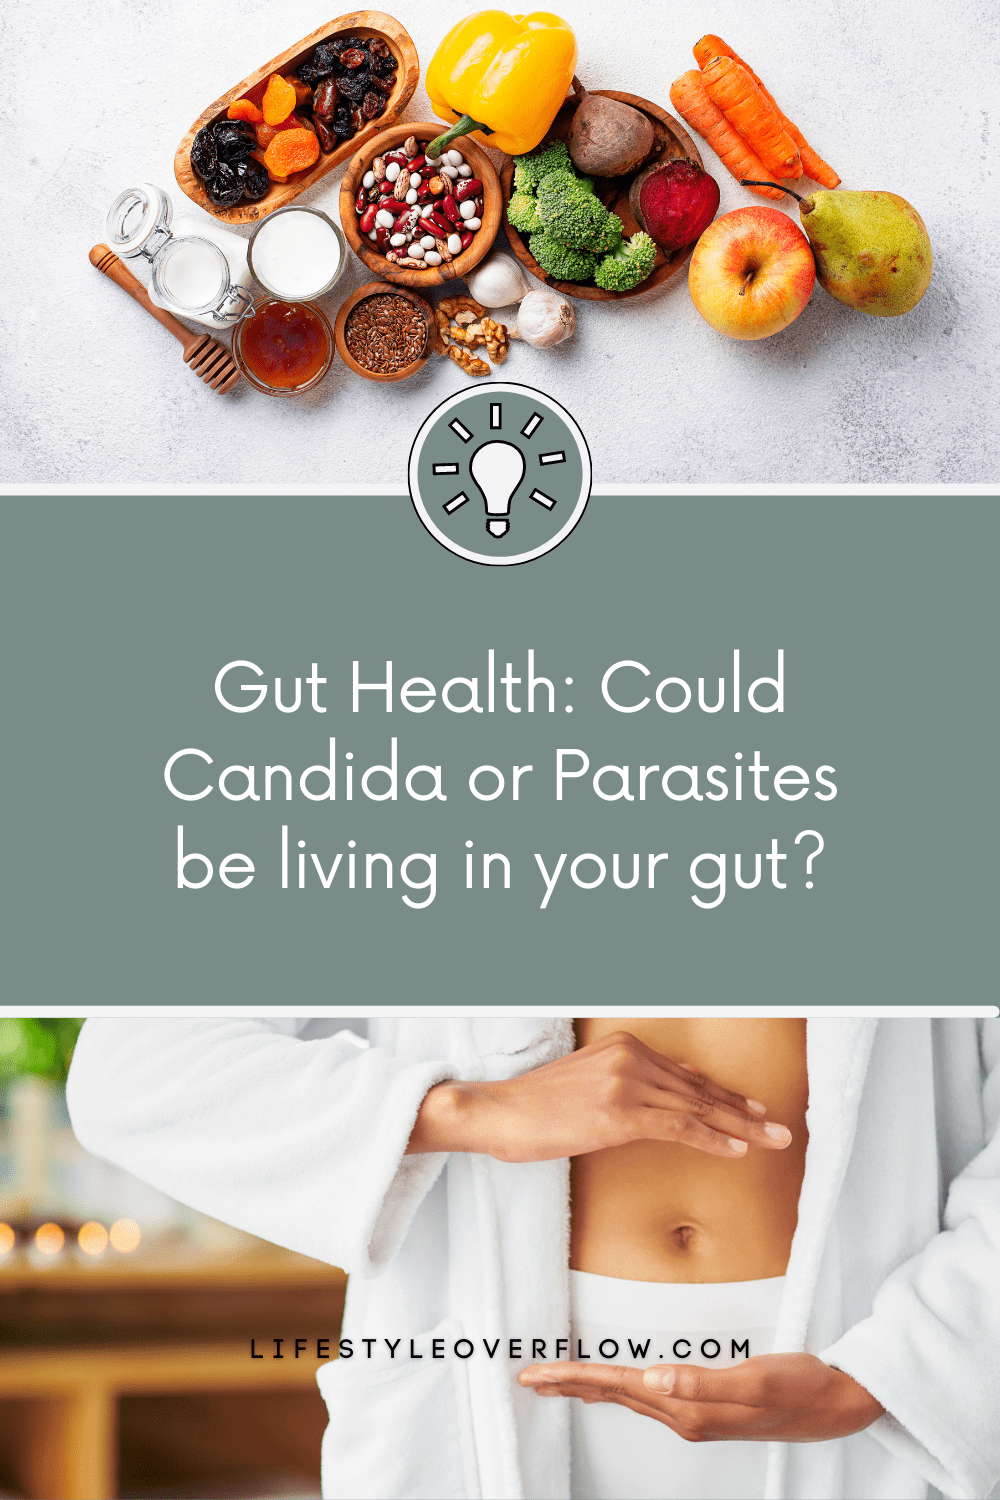 Gut Health: could Candida or Parasites be living in your gut? Two photos: one showing fruits, veggies and nuts, the second photo showing a women emphasizing her mid section.